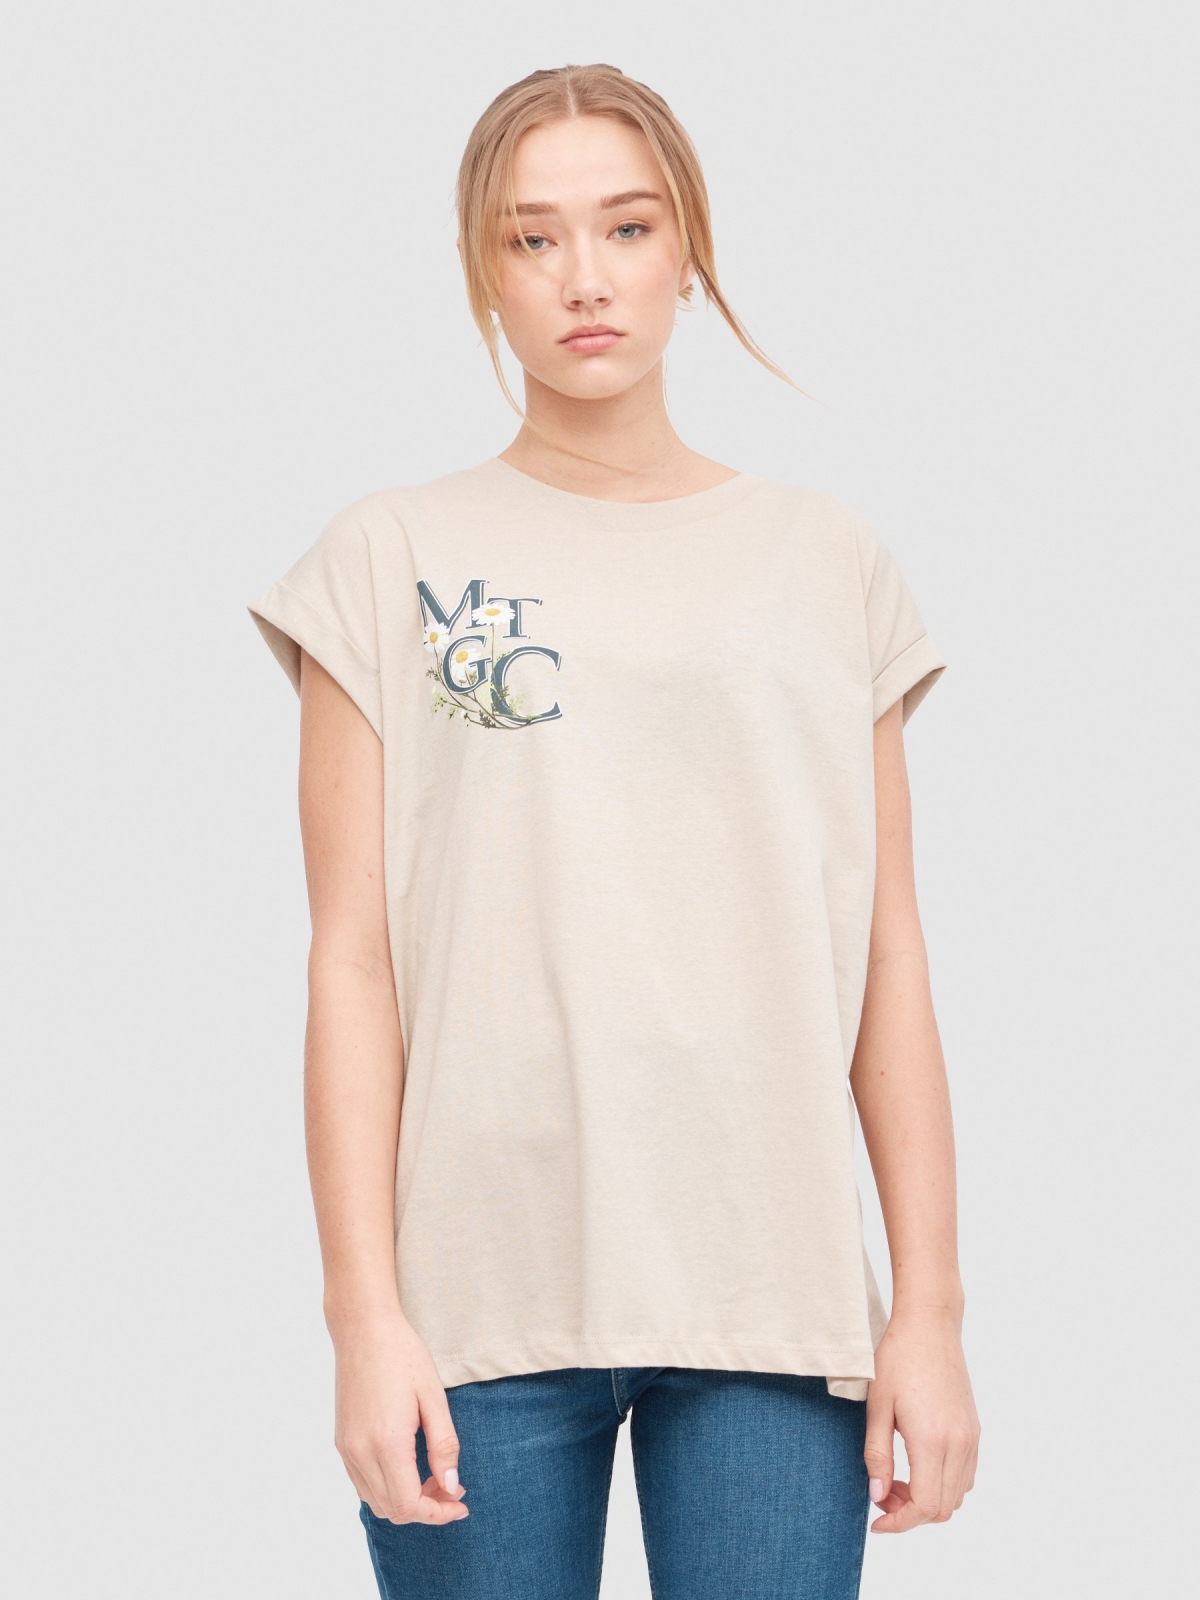 Memphis t-shirt taupe middle front view